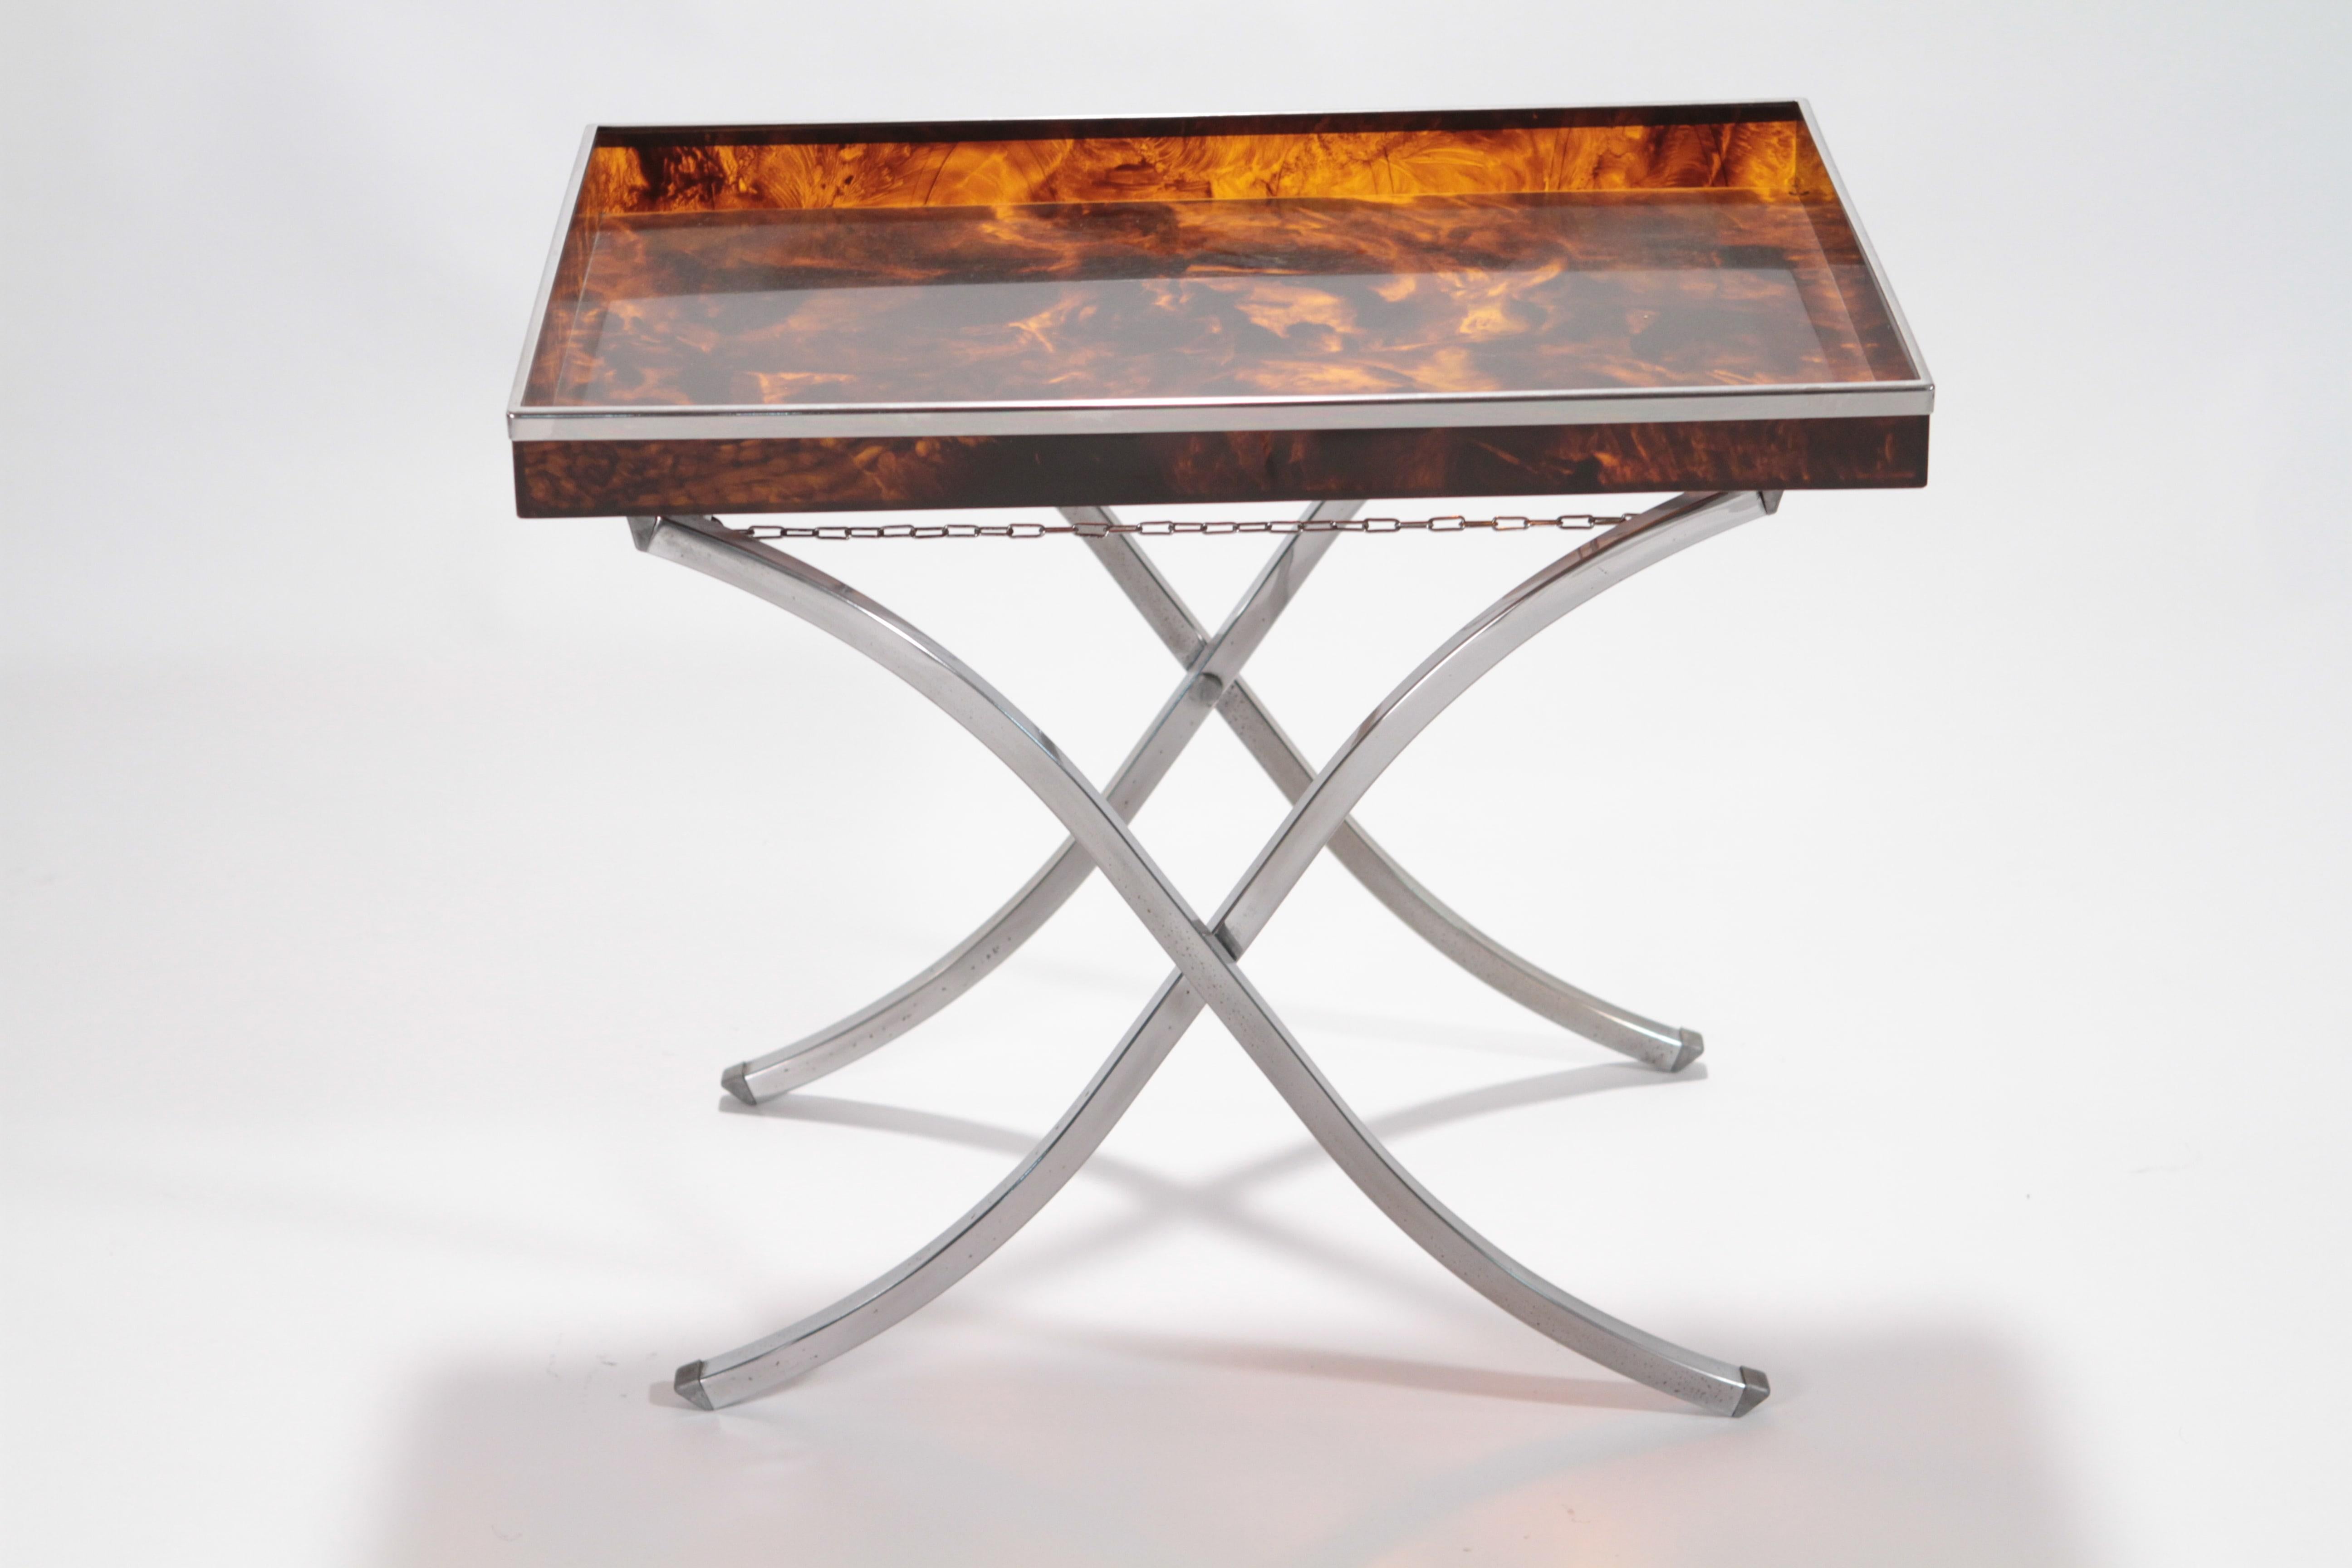 Heighten the modern look of your living area with this sophisticated side table with removable tray in chrome and plexiglass with faux tortoise pattern produced by the French manufacturer Maison Mercier back in the seventies. It is stunning in